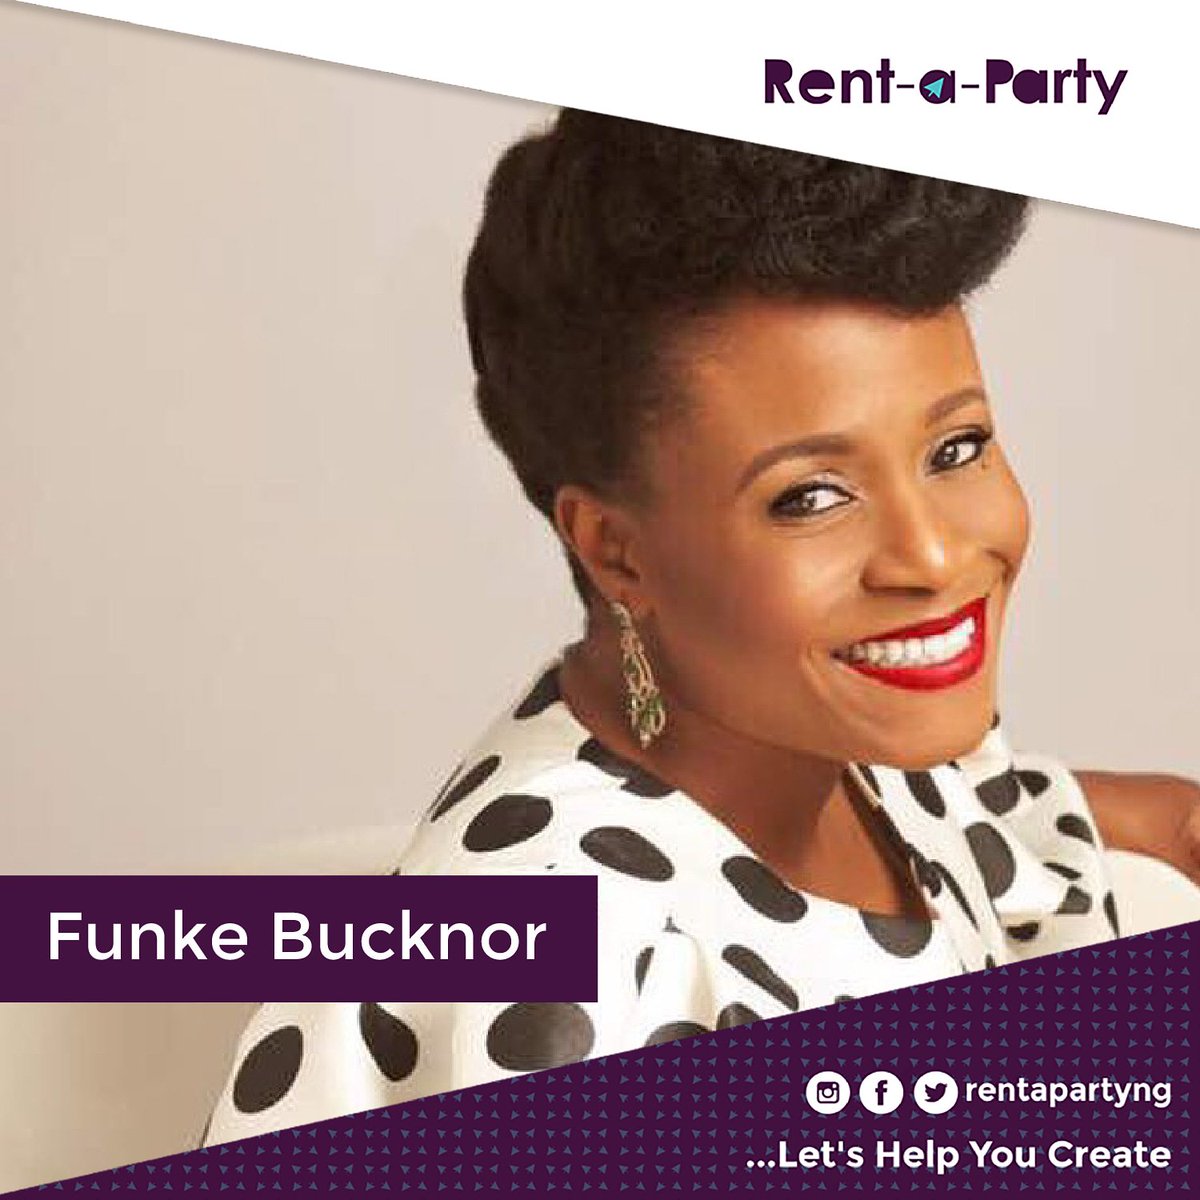 Our #WCW is the amazing @funkebucknor, founder/CEO of @ZapphaireEvents.This Lawyer turned #EventPlanner has received so many accolades for her work. As one of the pioneers of #eventplanning in Nigeria, we love her passion and courage in breaking frontiers

#Nigerianeventplanner